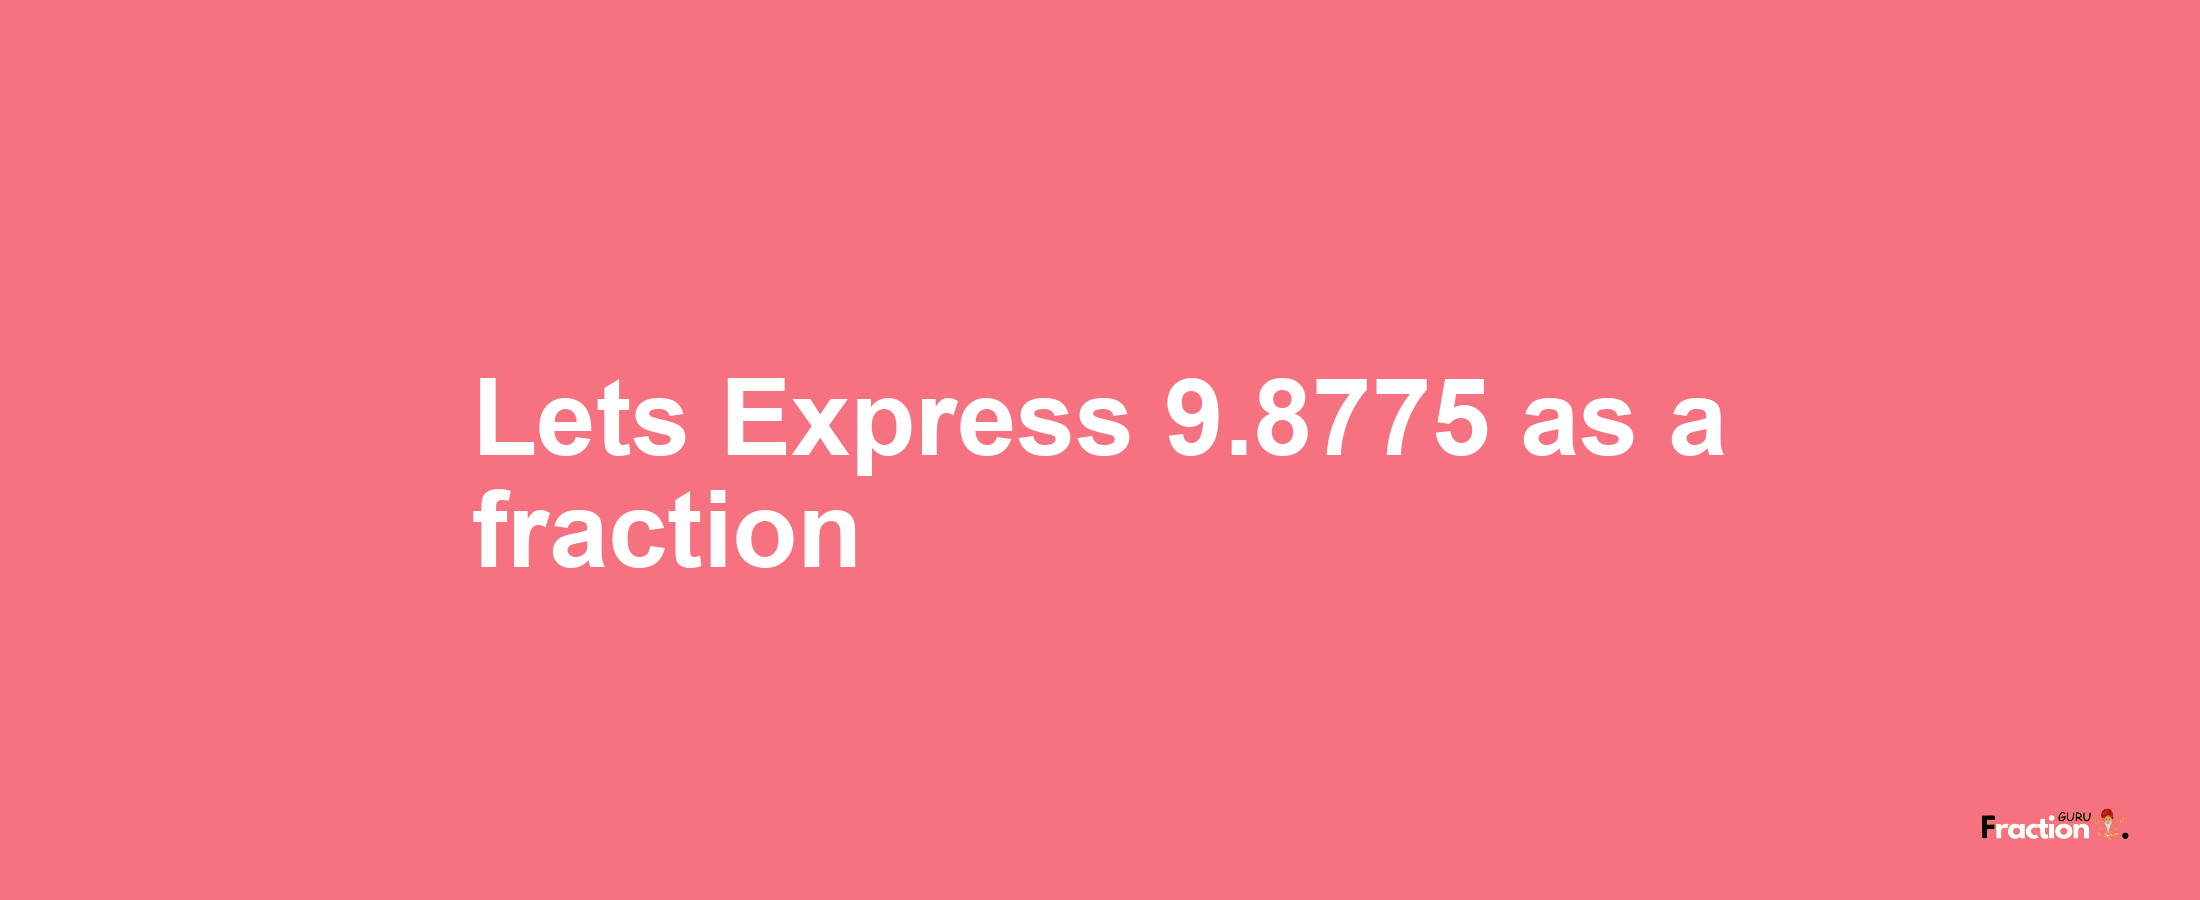 Lets Express 9.8775 as afraction